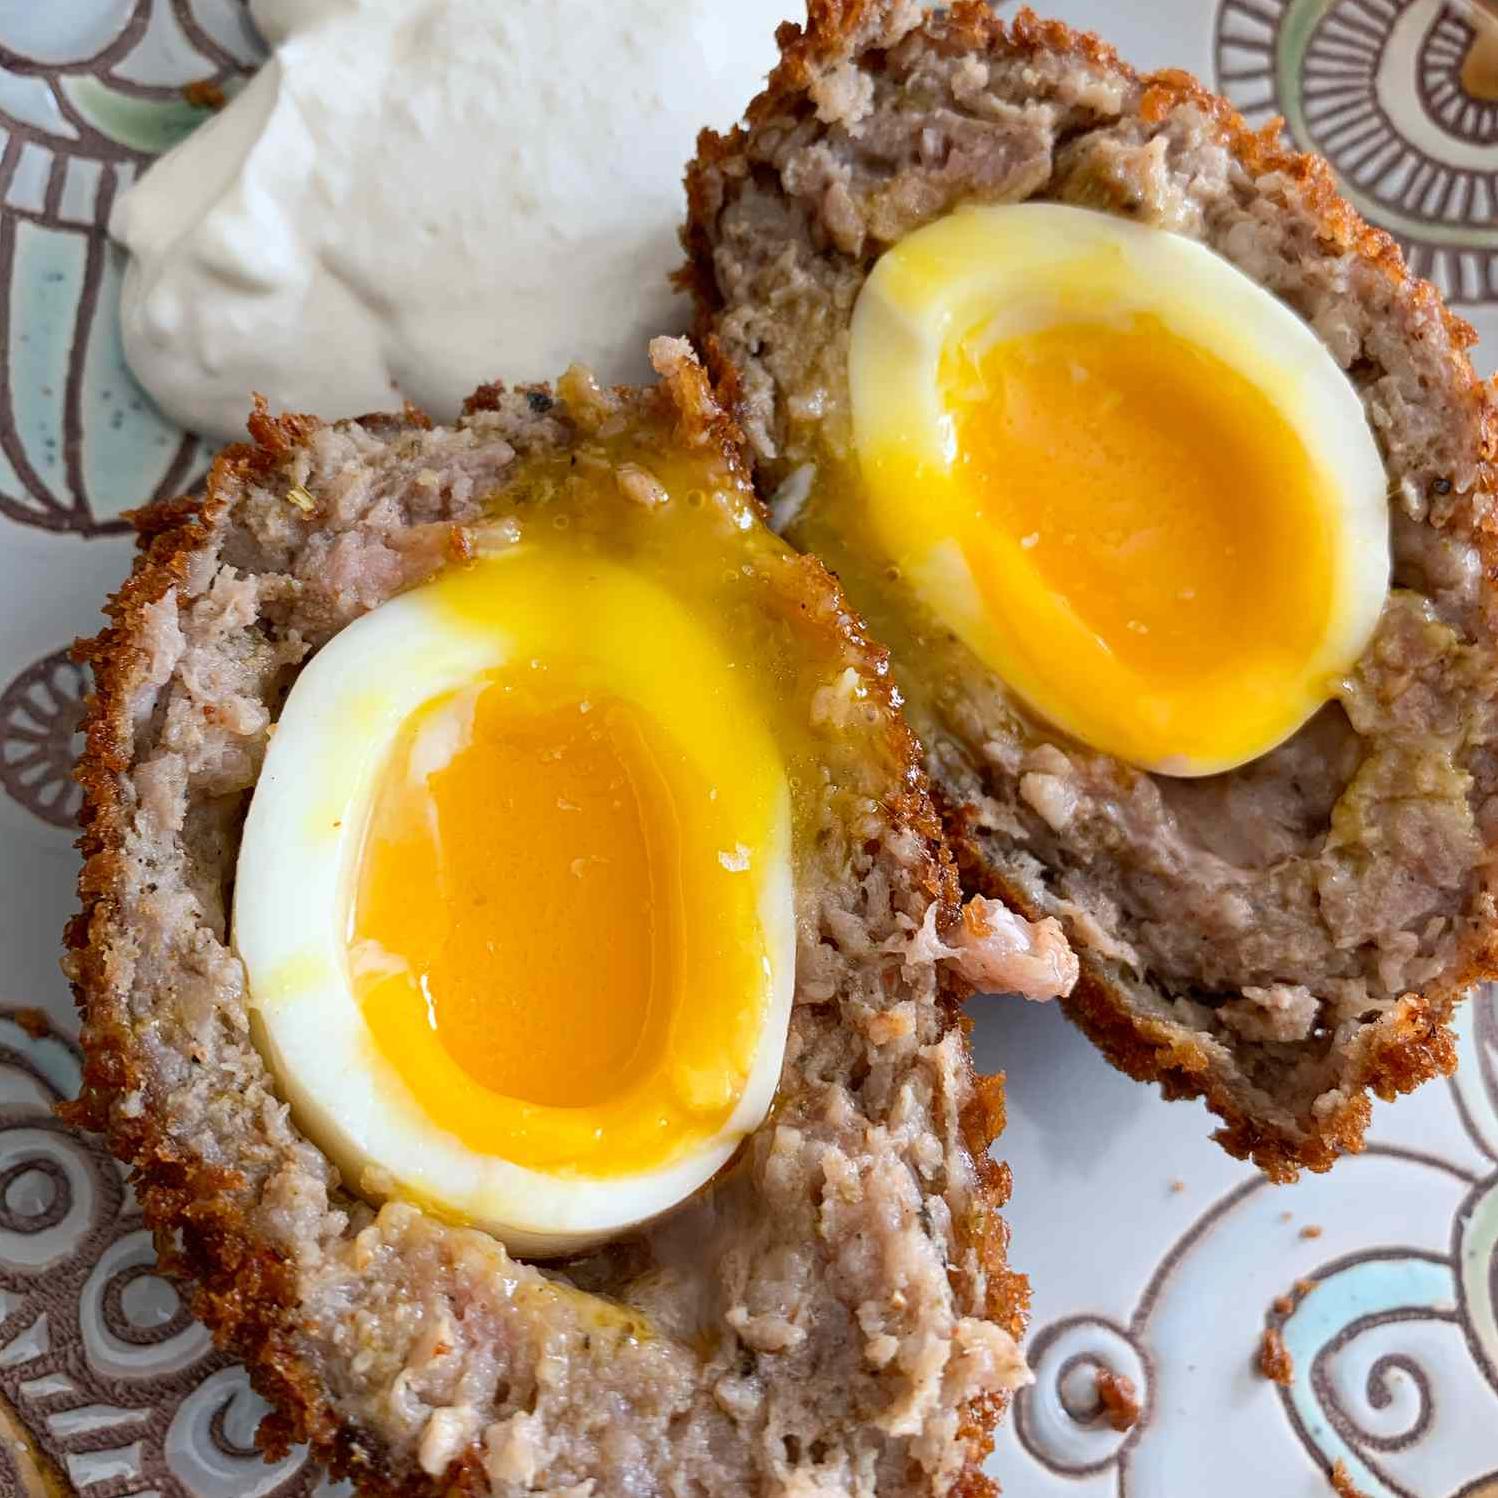  The perfect combination of savory and spicy, Hot Scotch Eggs are a real treat.